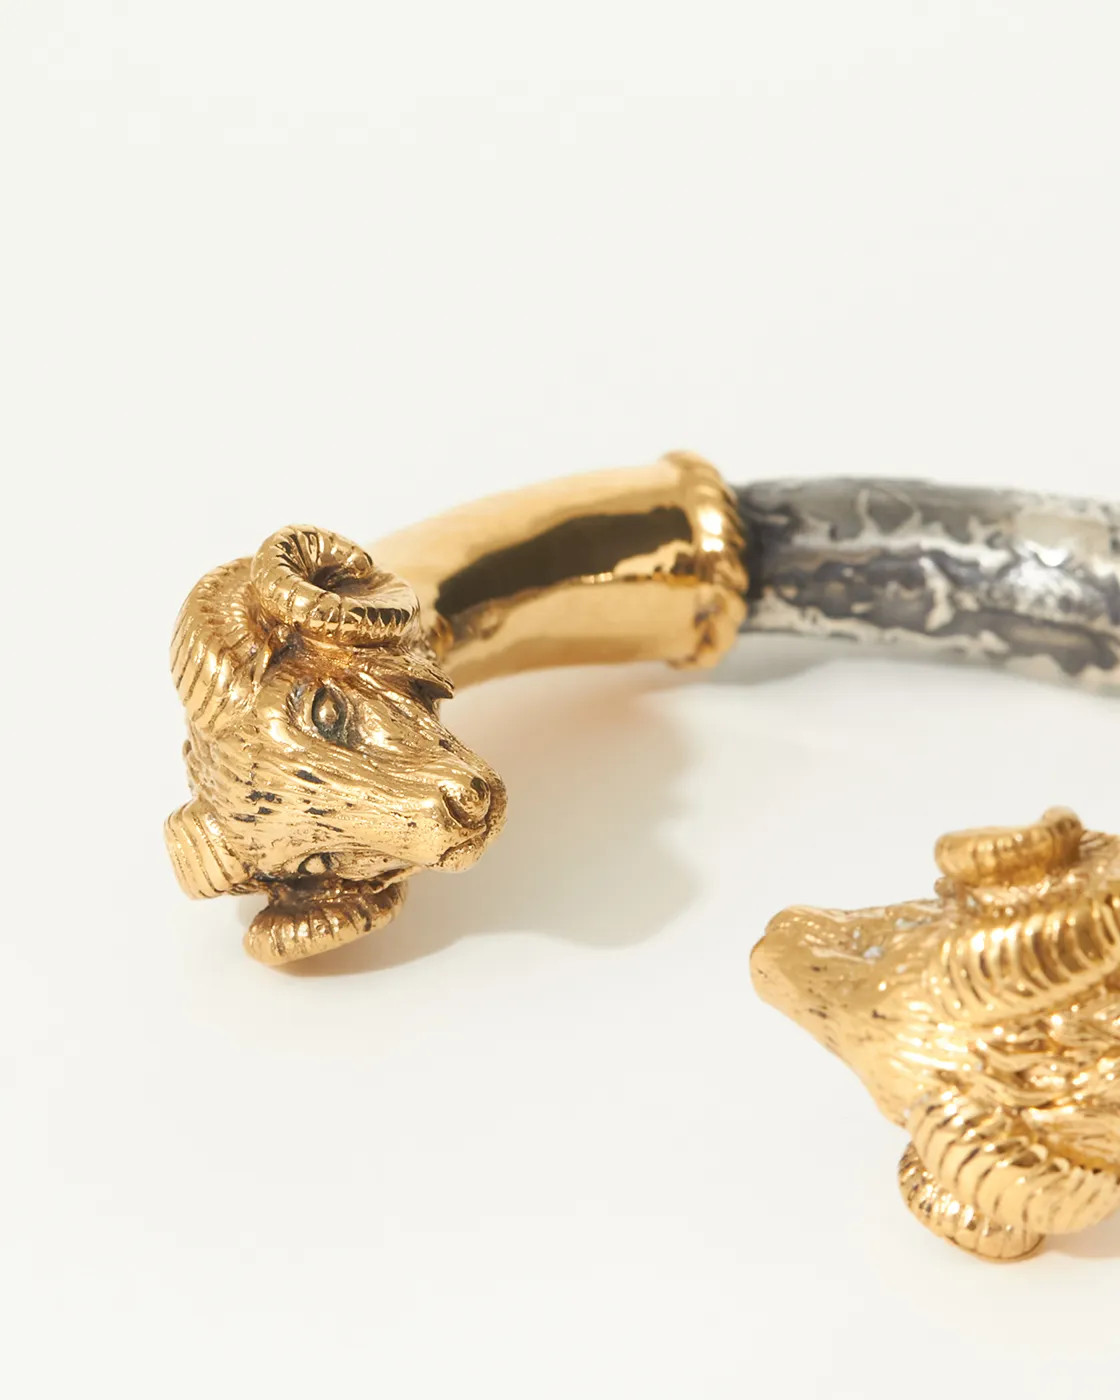 Solid silver Gold-Plated Ram’s Head Cuff Bracelet